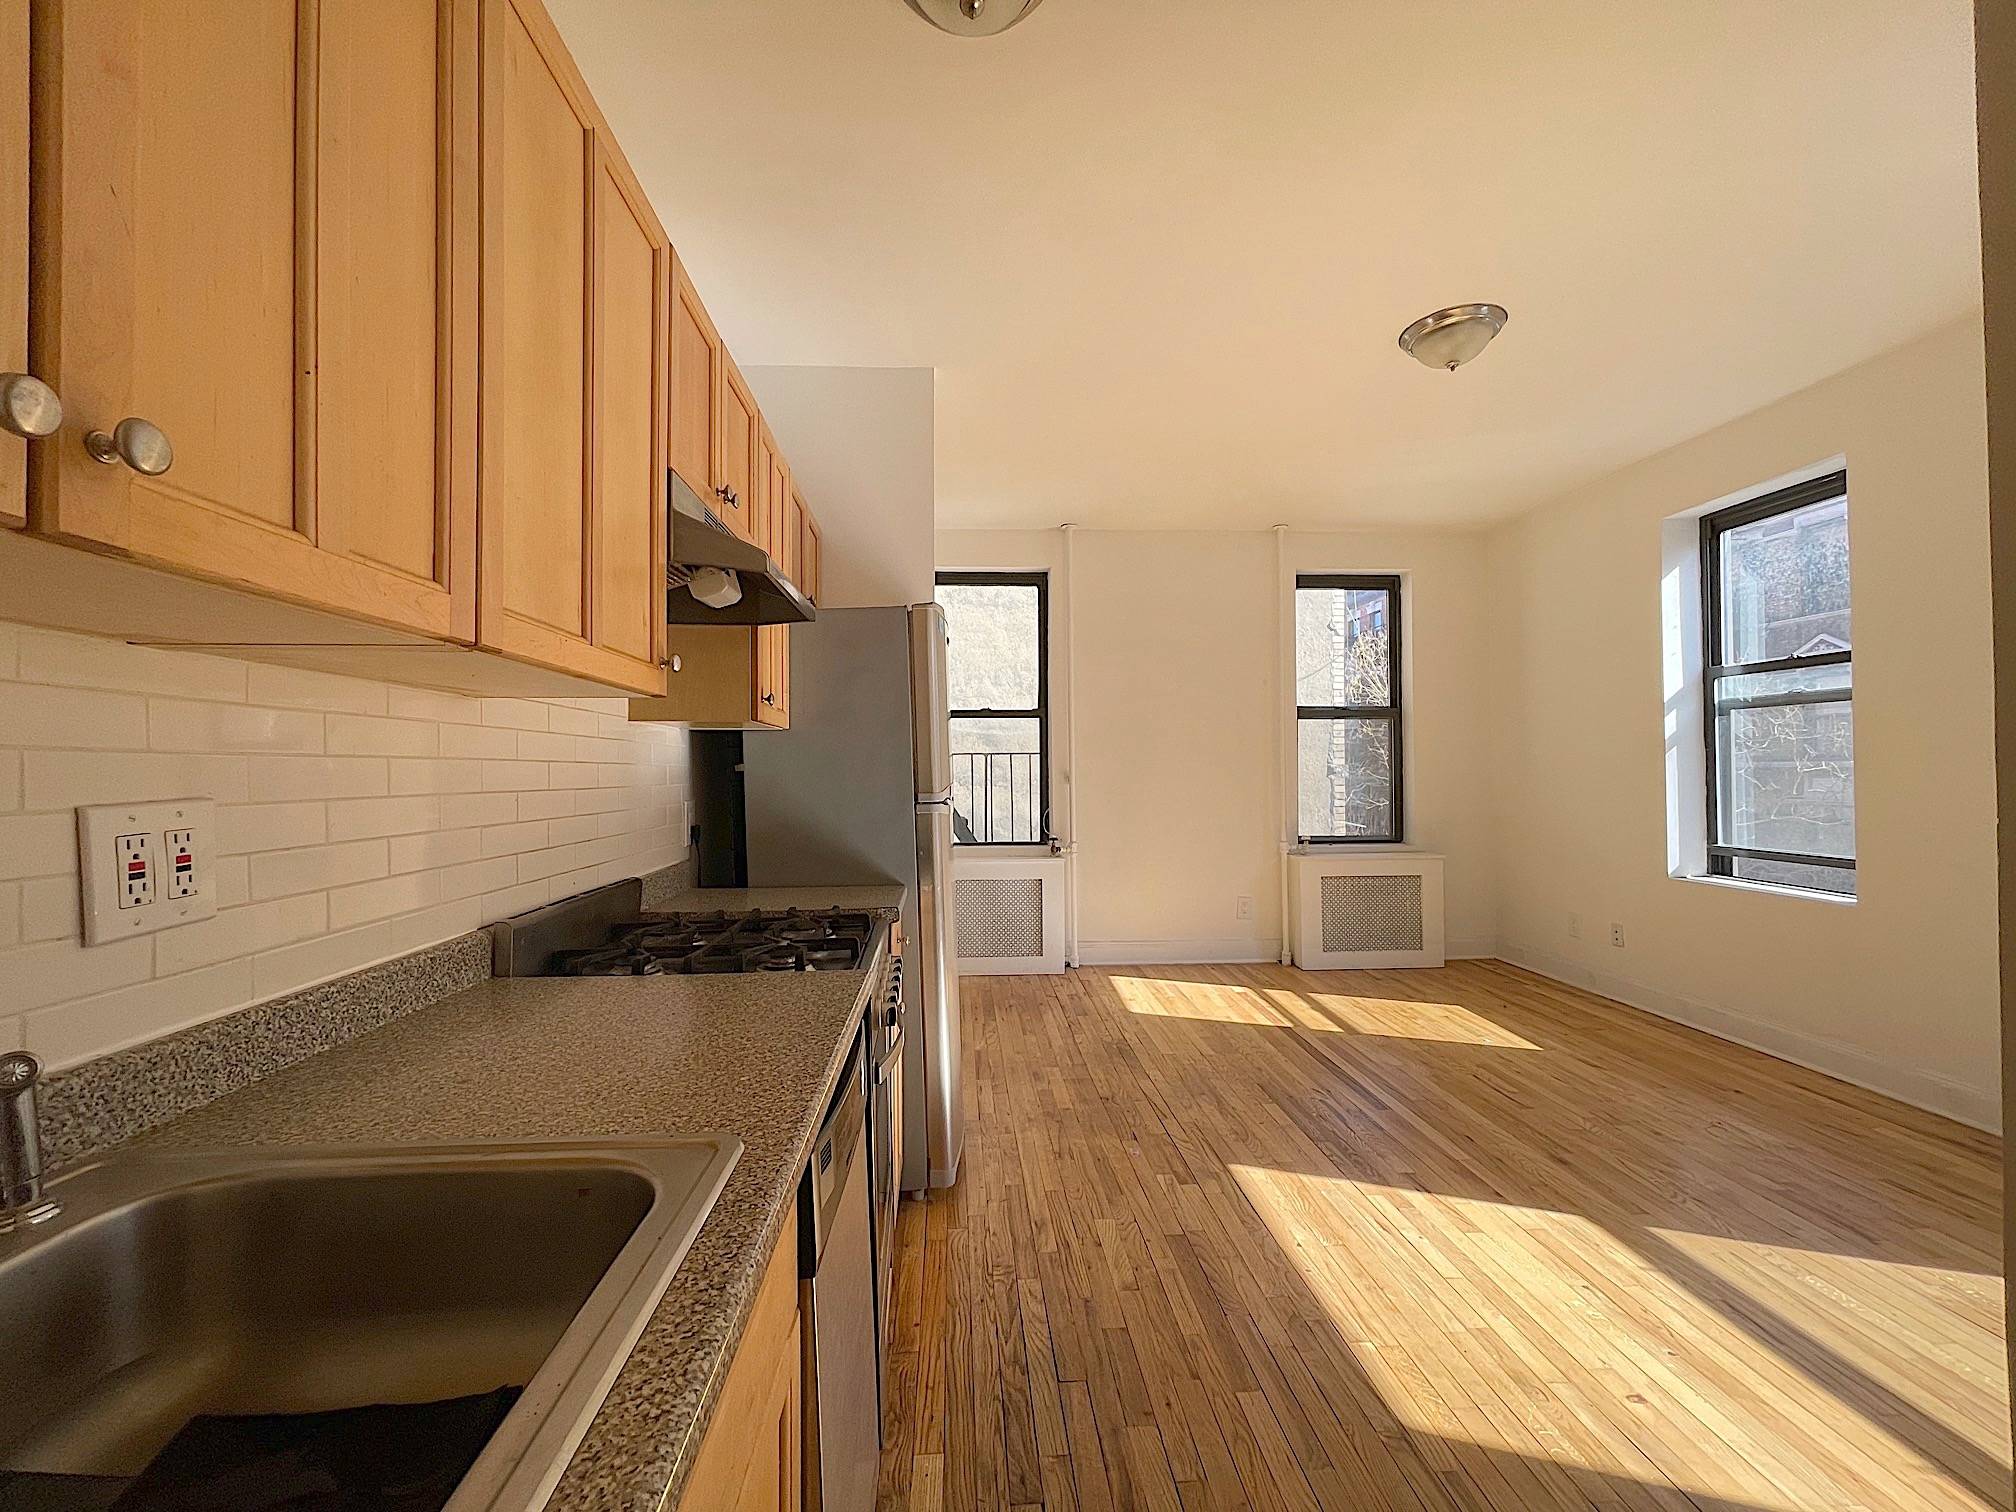 THE APARTMENTThis fabulous one bedroom apartment is completely renovated with hardwood floors, high ceilings and great closet space.